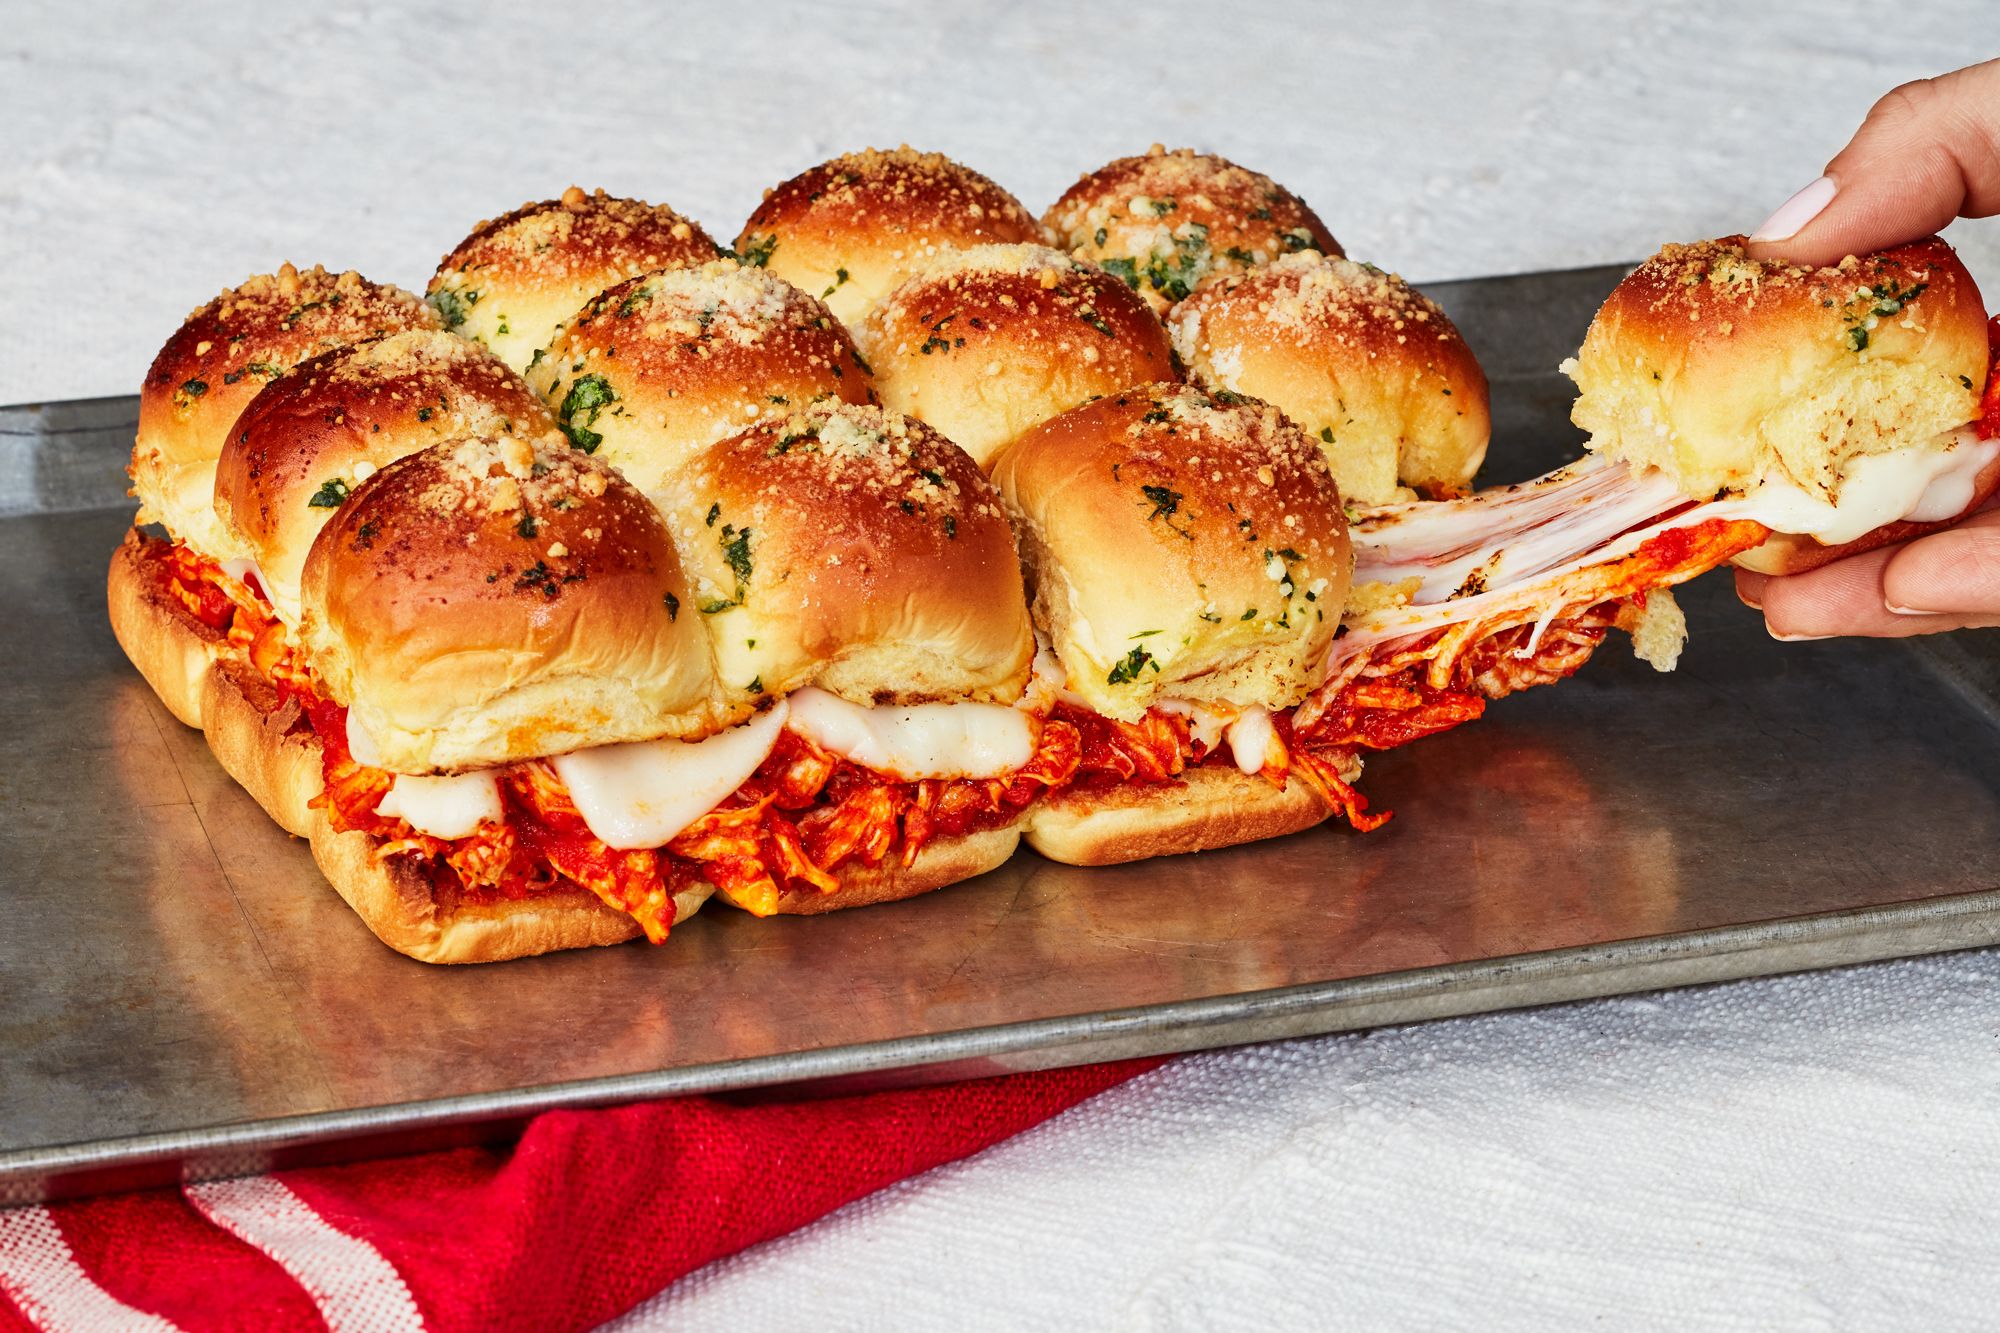 Best Shredded Chicken Parm Sliders - How To Shredded Chicken Parm Sliders